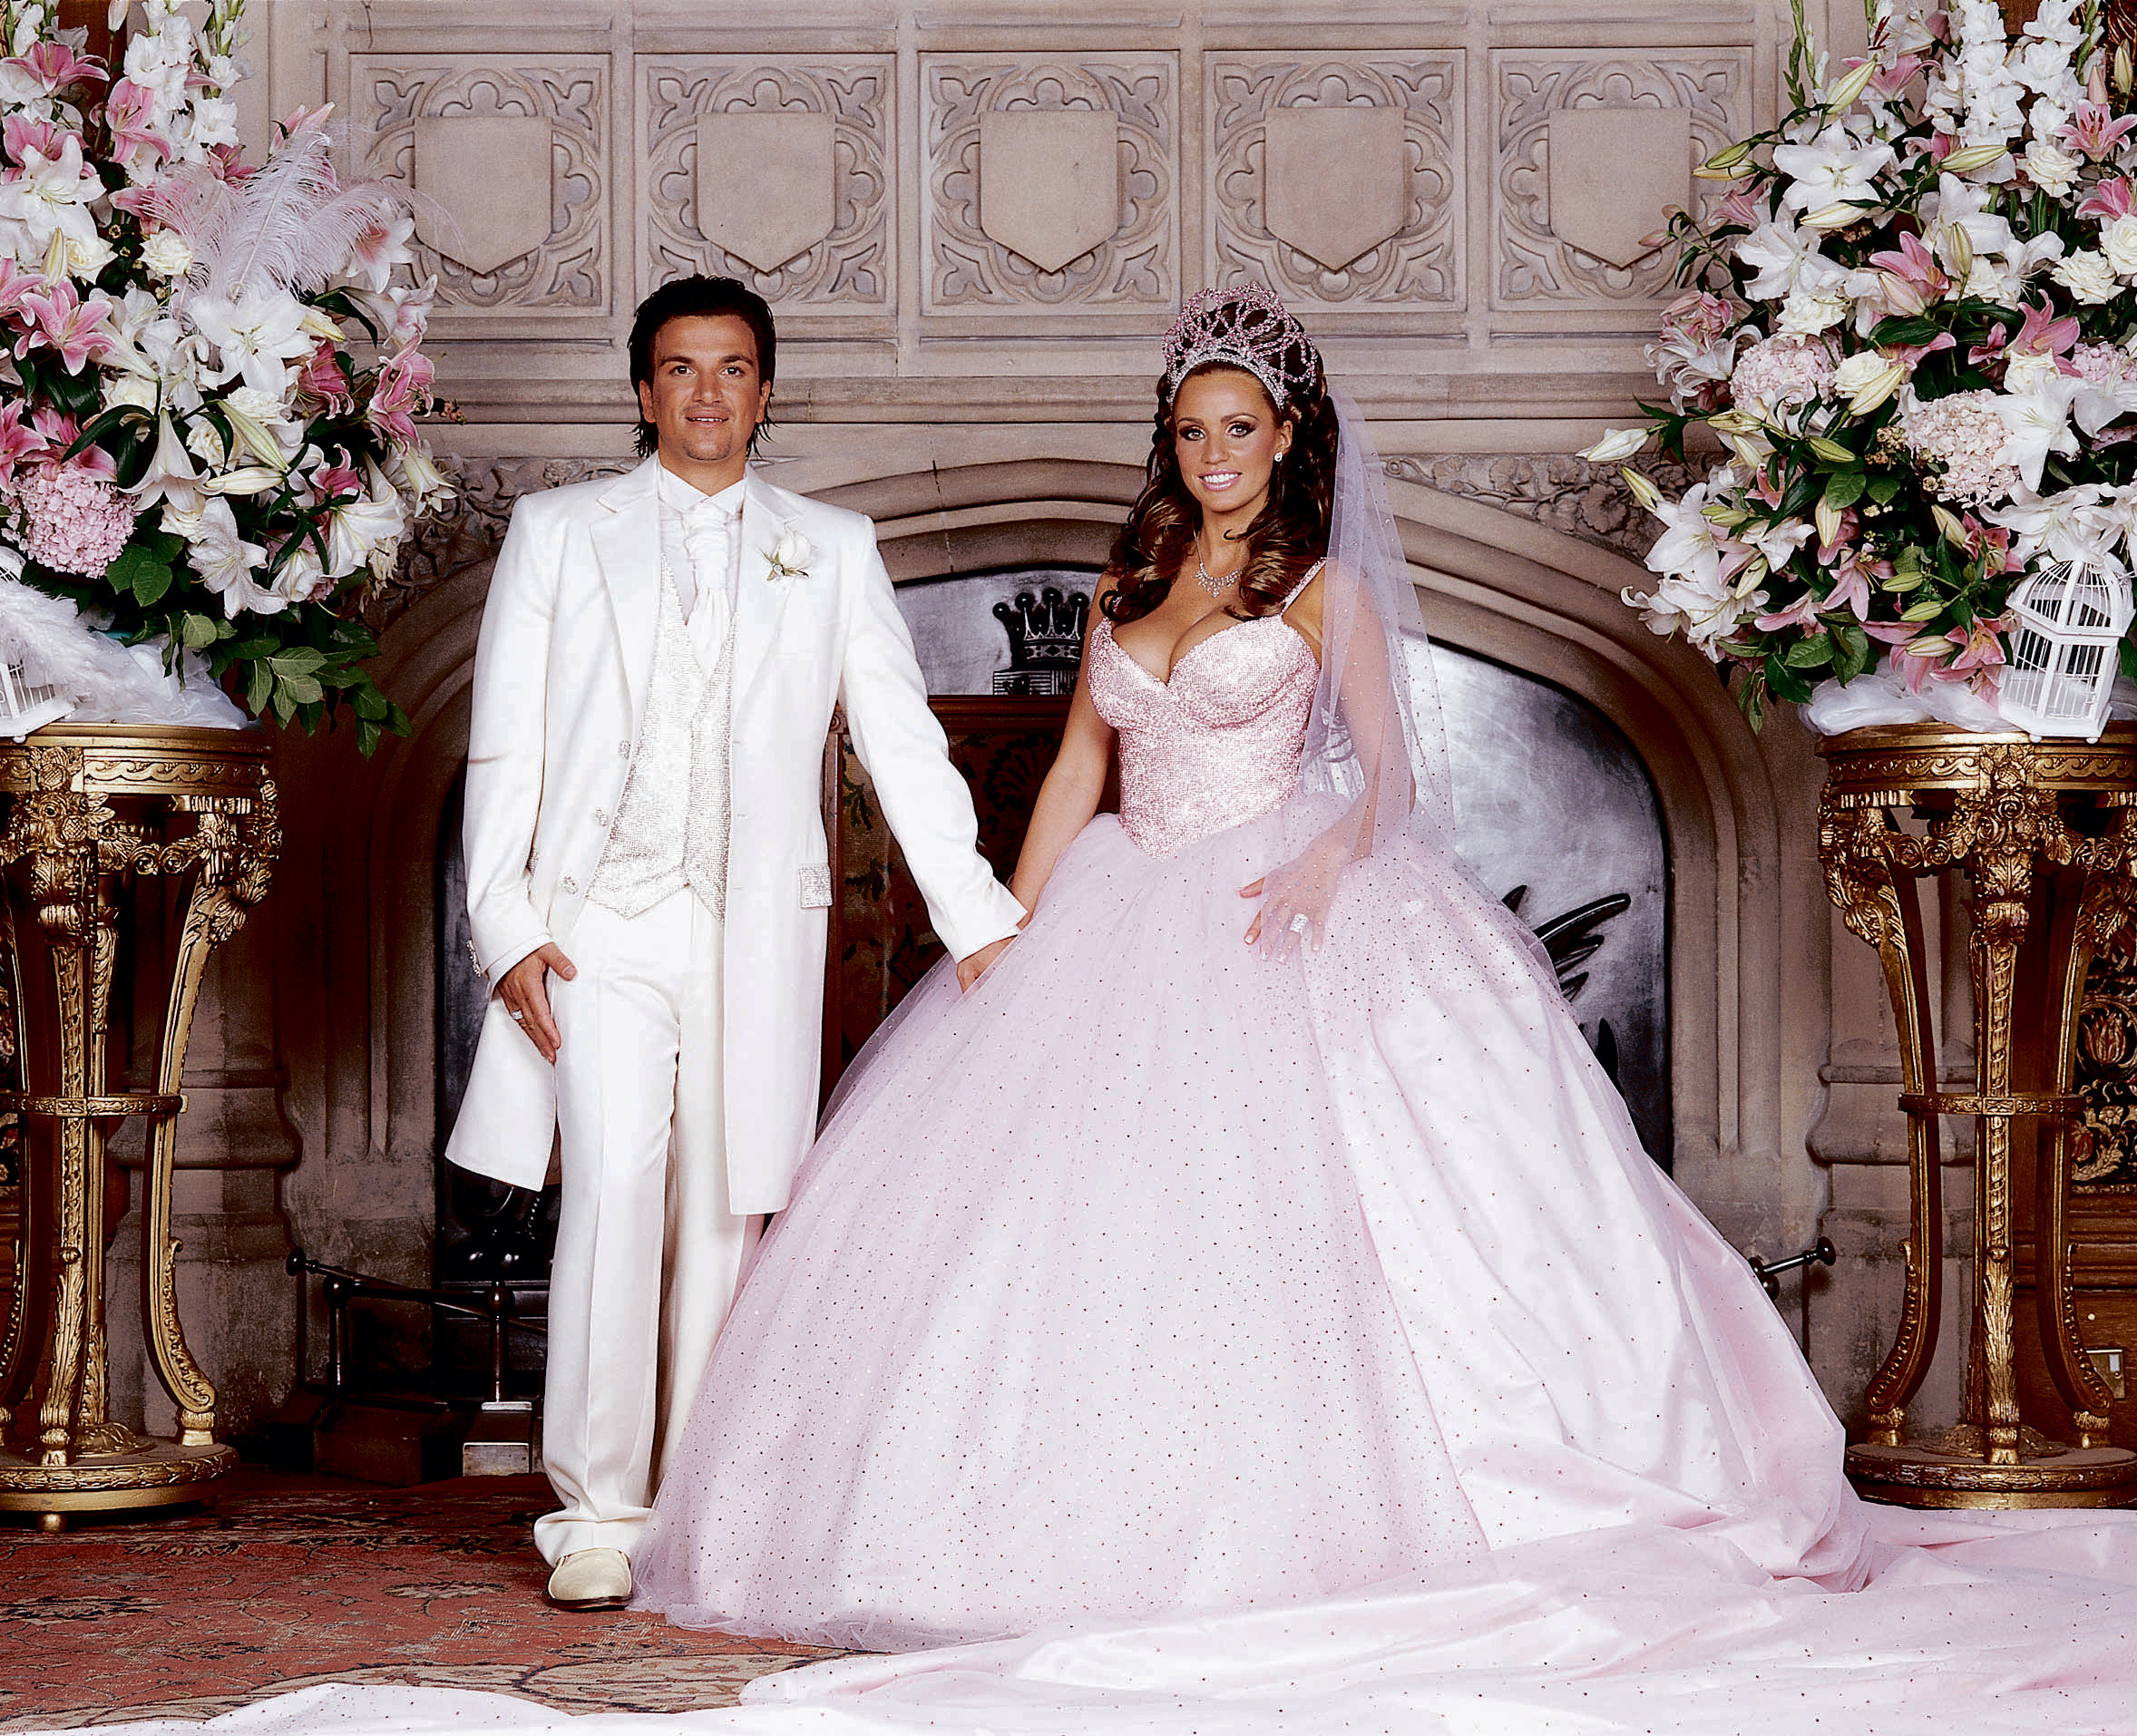 Katie Price and Peter Andre wedding